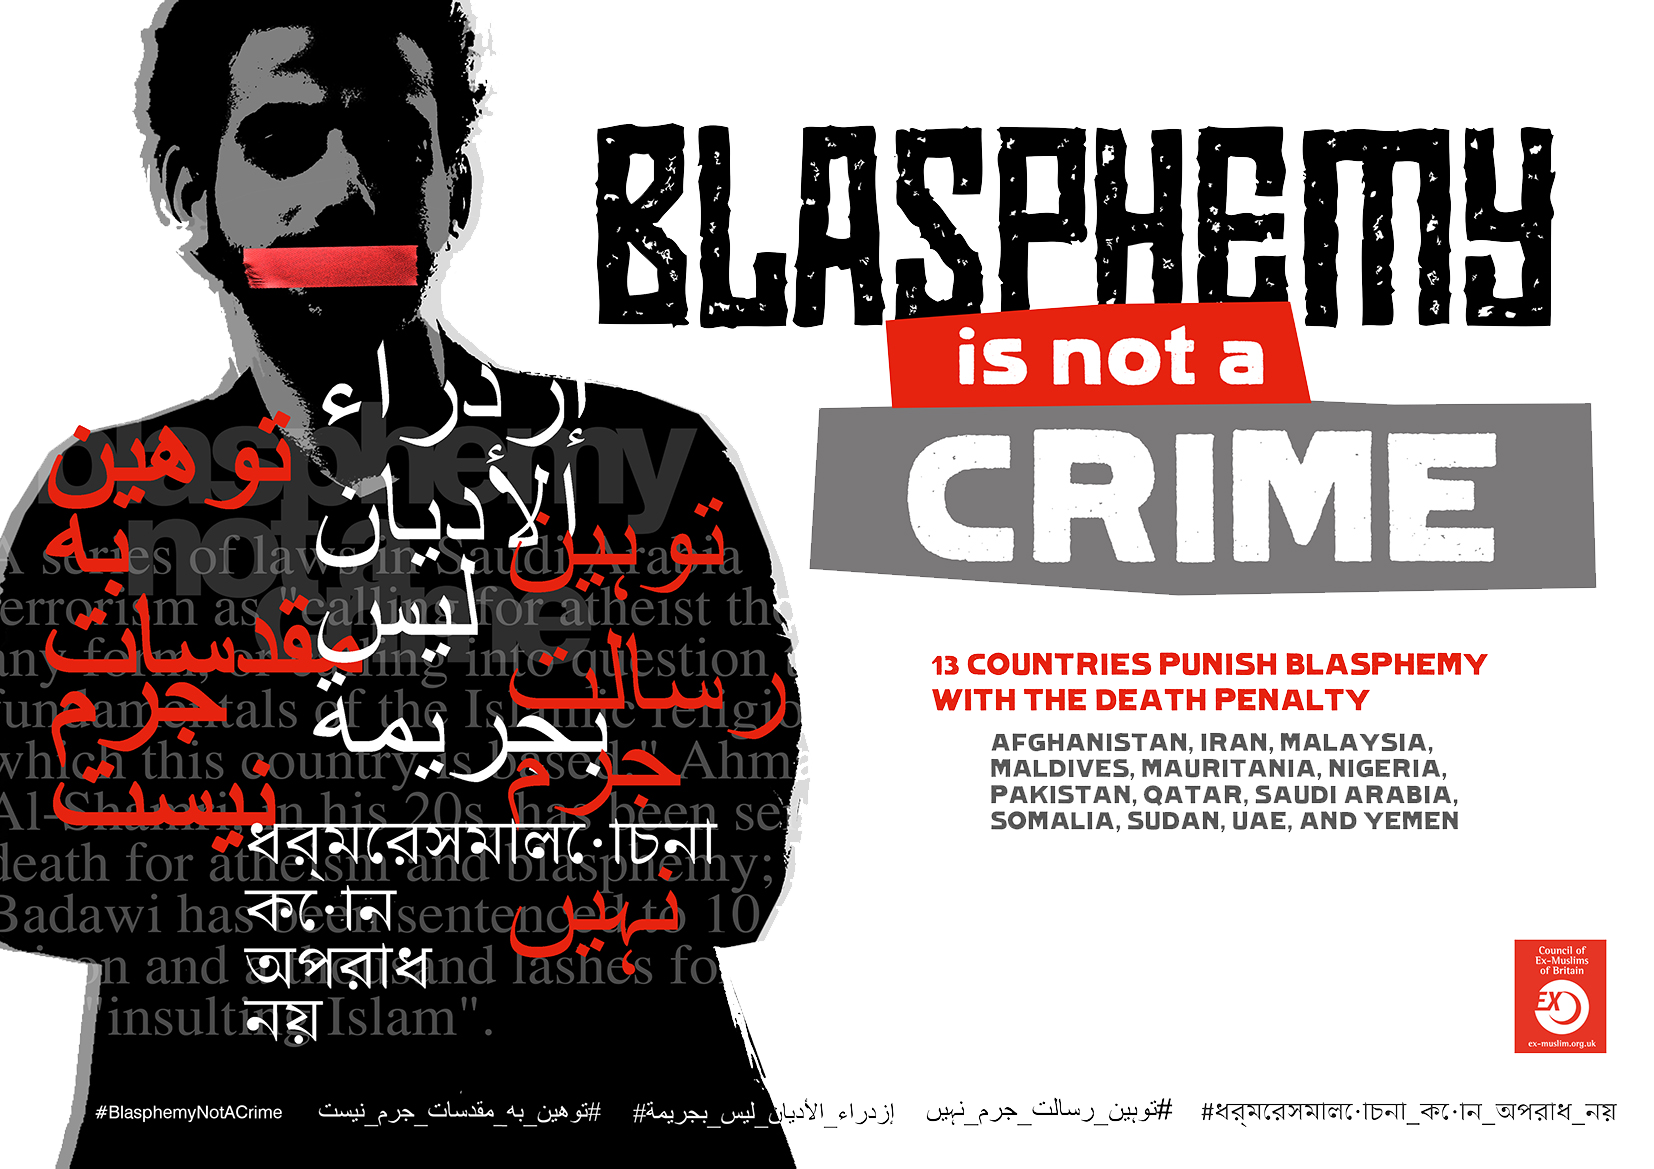 Blasphemy is NOT a Crime campaign